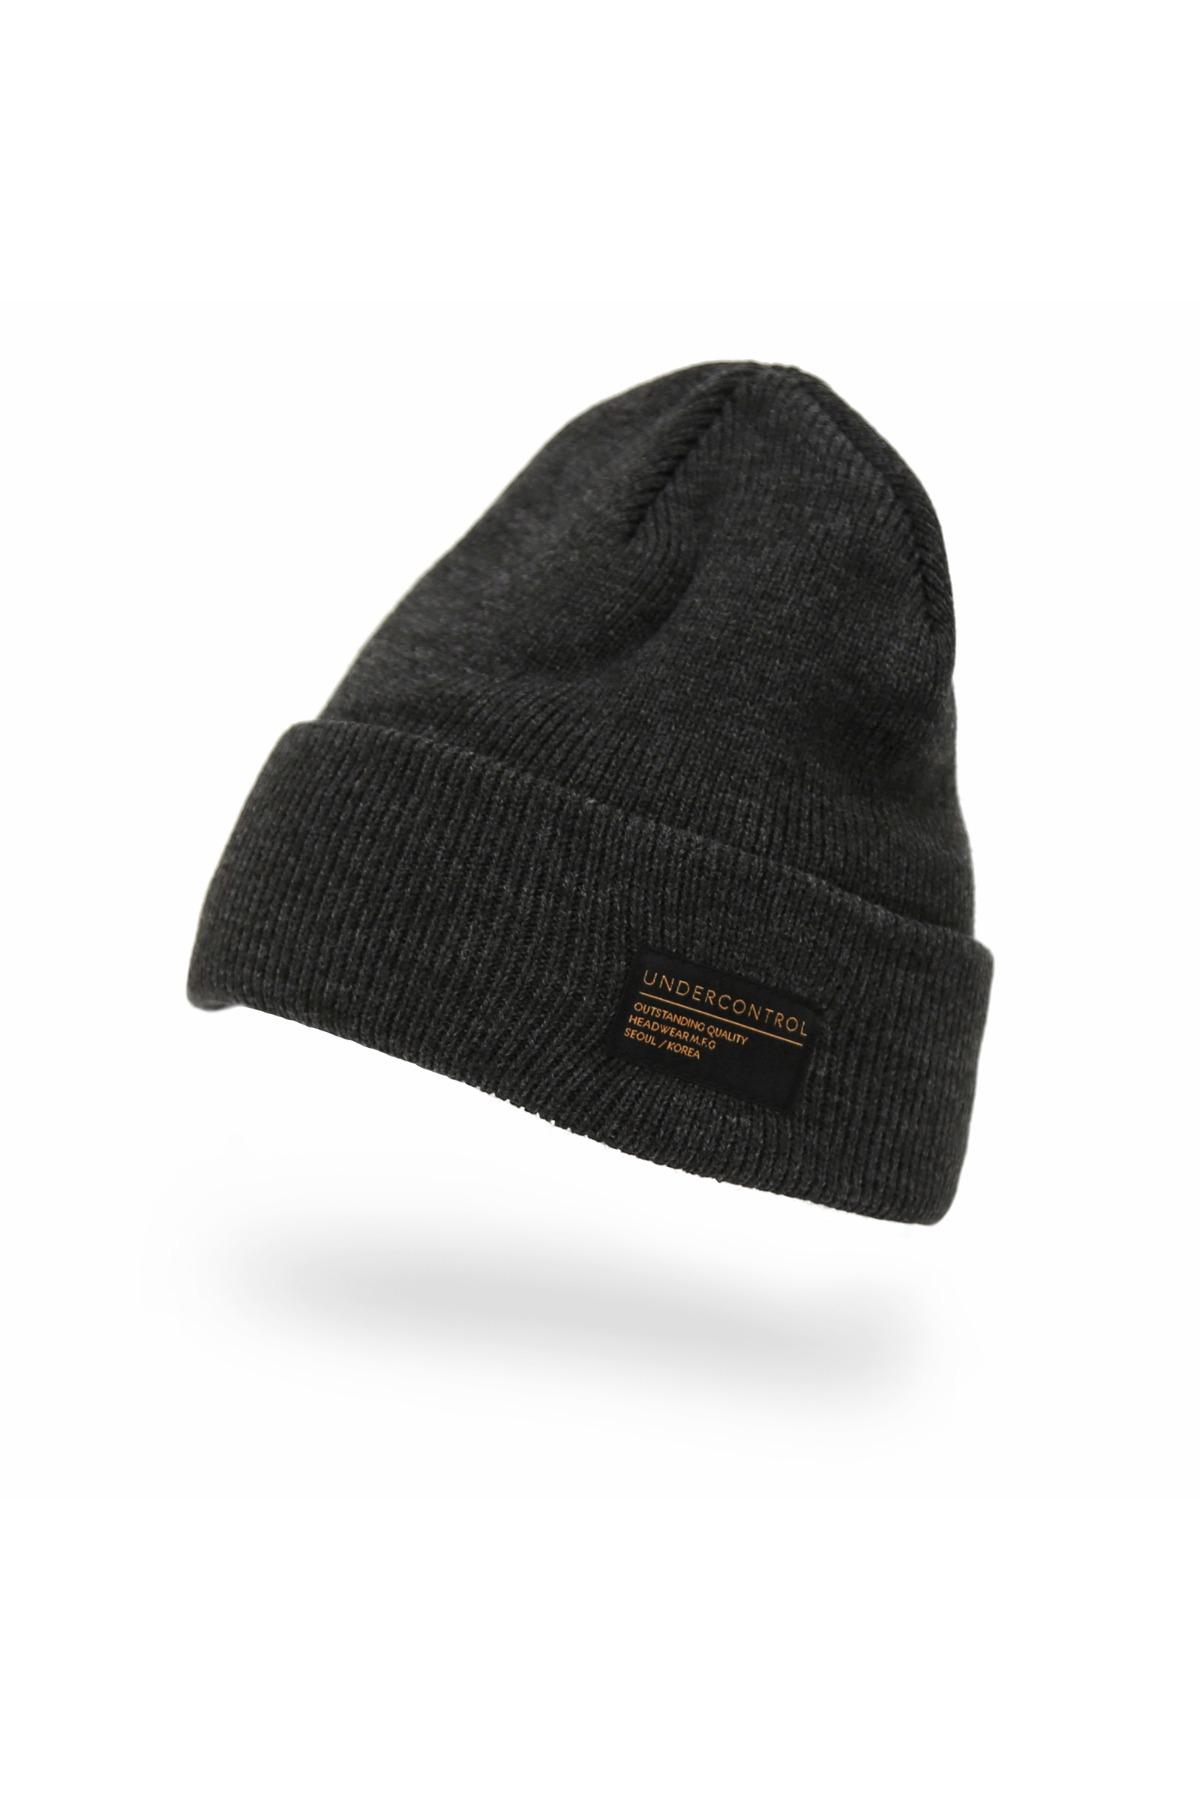 BEANIE / LOOSE FIT / AC / CHARCOAL GREY (BOX PACKAGE)